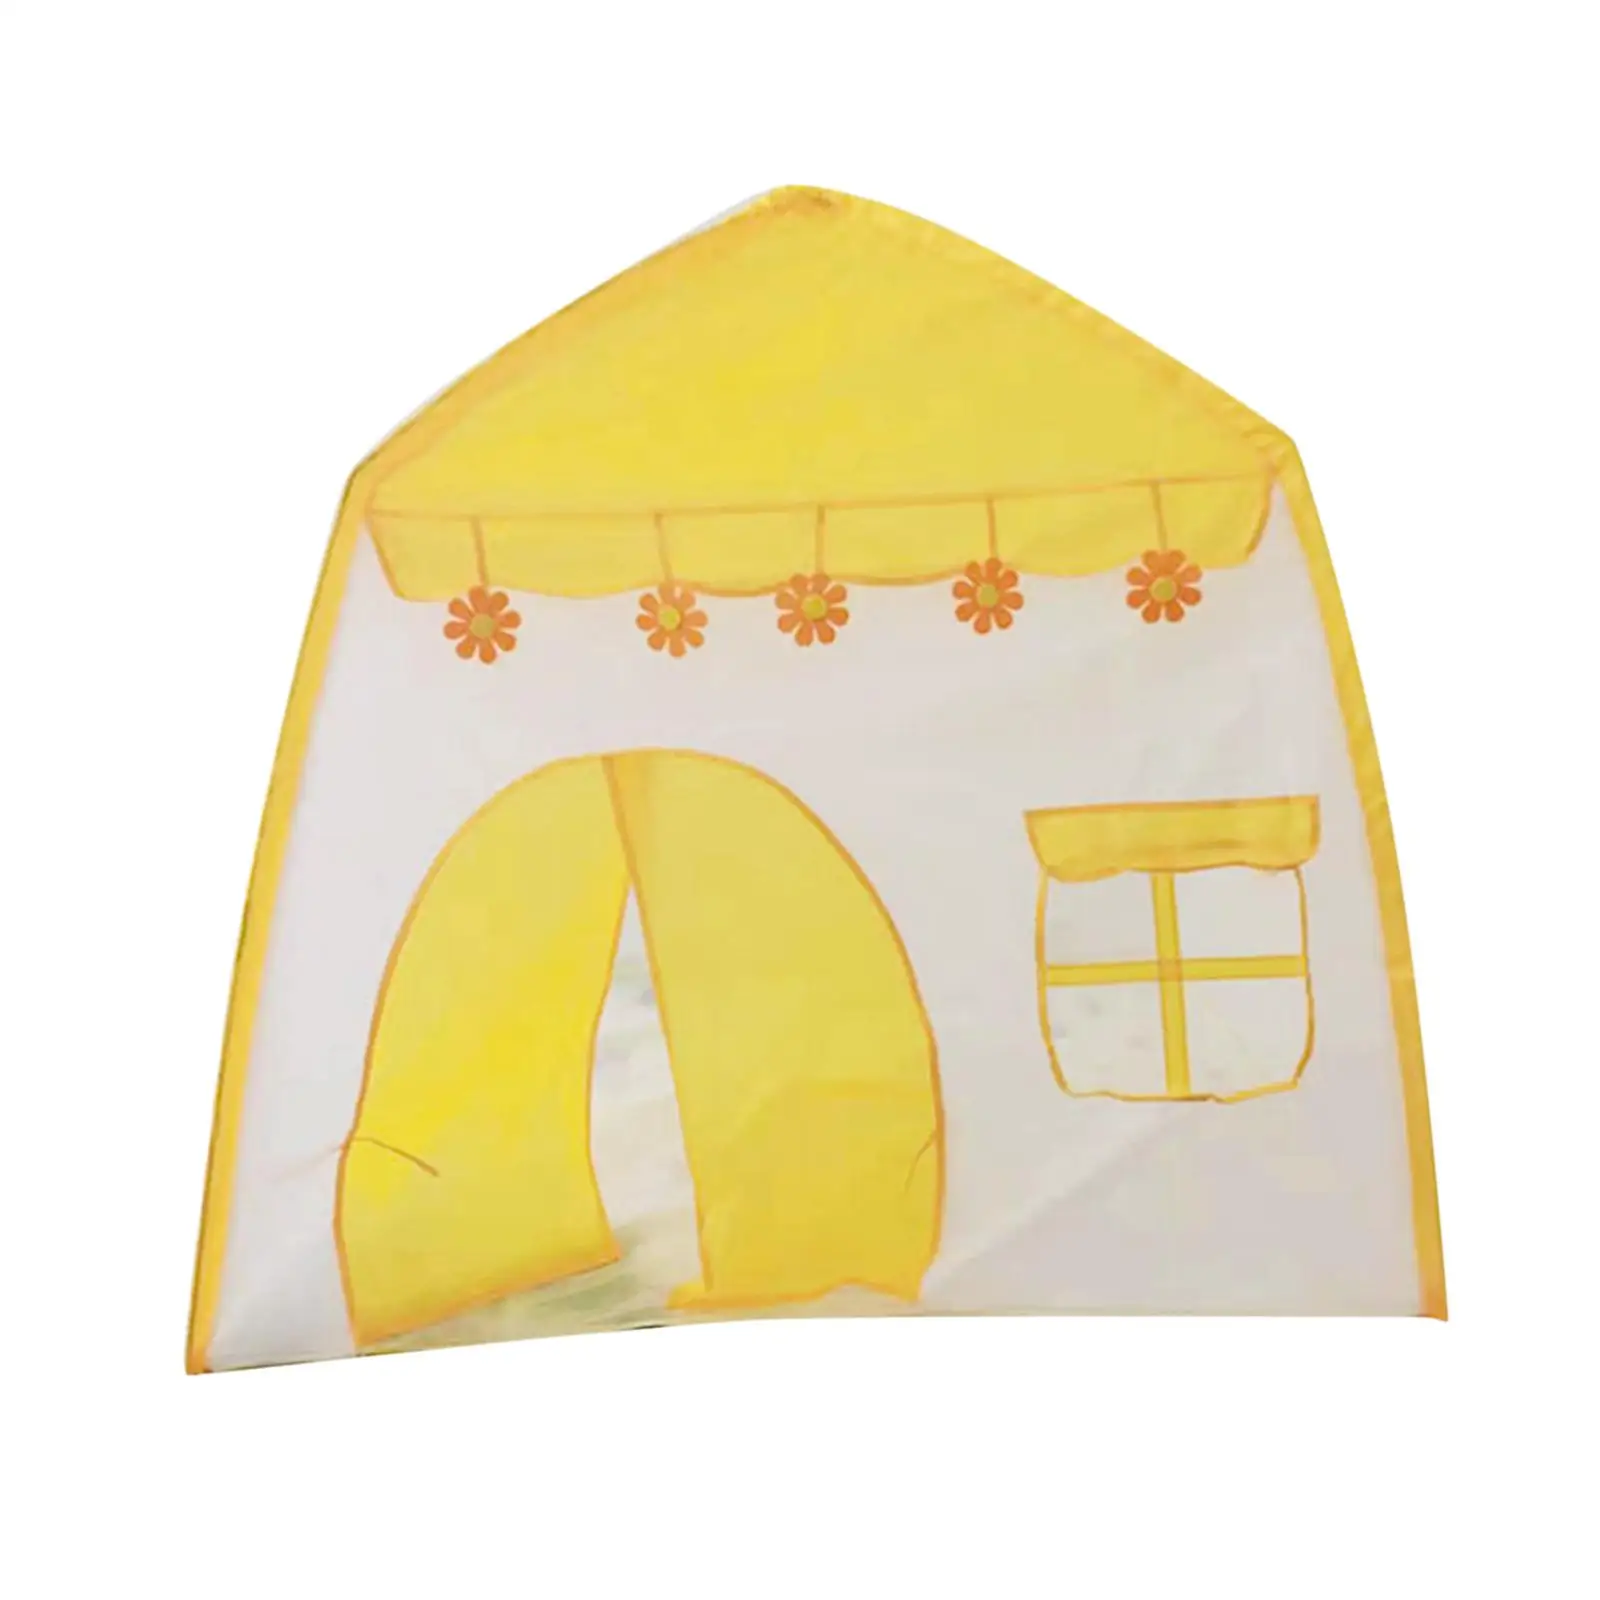 Kids Play Tent Outdoor Indoor Game Fun Game Tent Easy Installation Portable for Park Outdoor Indoor Camping Home